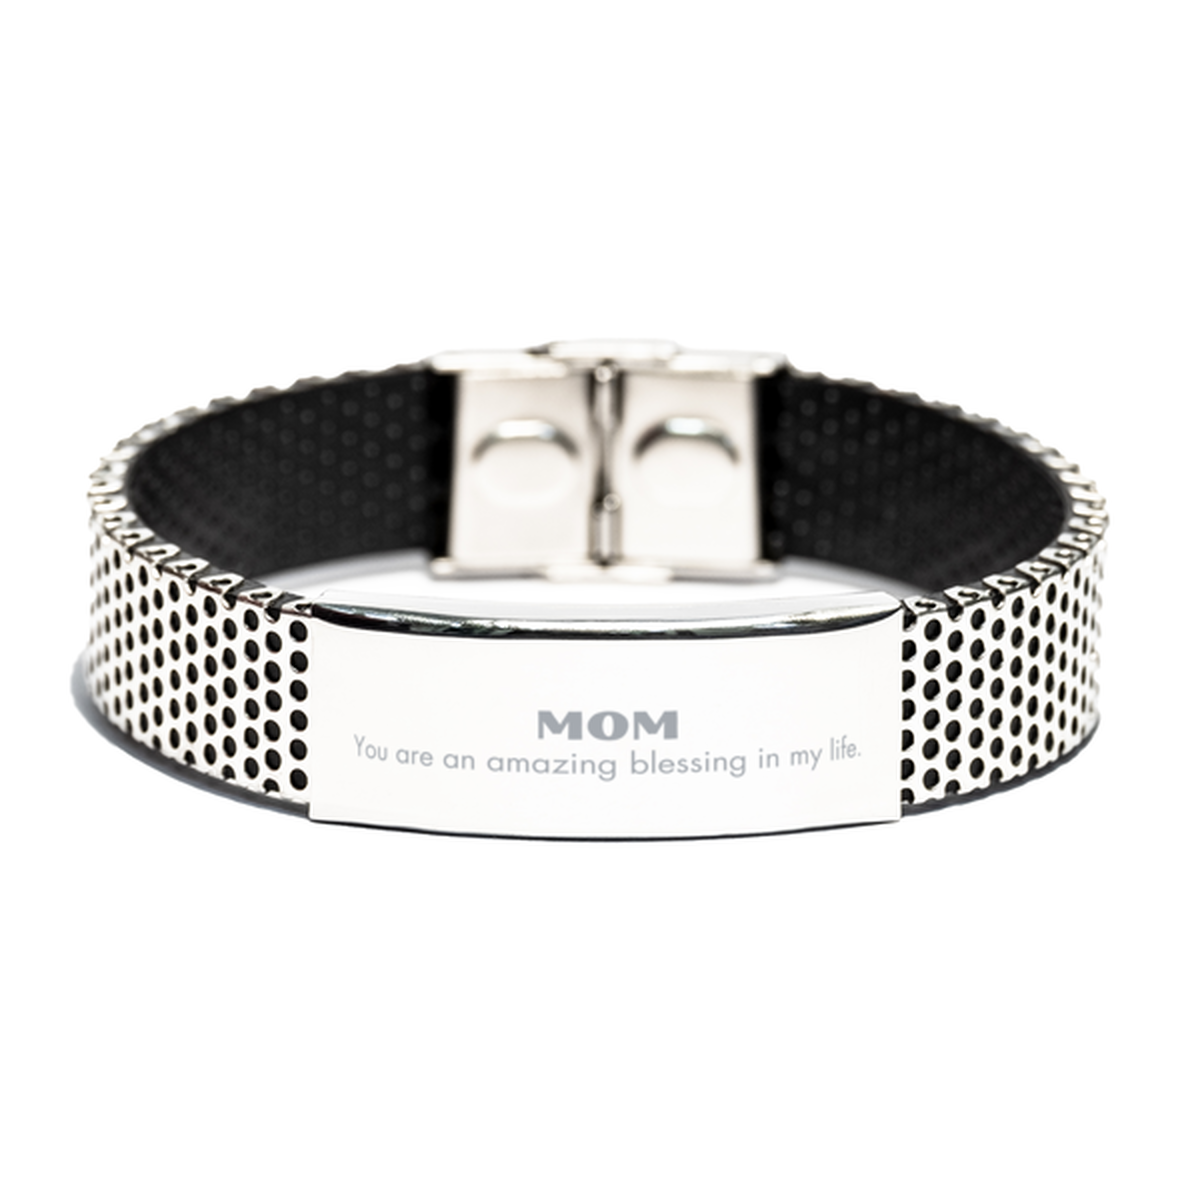 Mom Stainless Steel Bracelet, You are an amazing blessing in my life, Thank You Gifts For Mom, Inspirational Birthday Christmas Unique Gifts For Mom